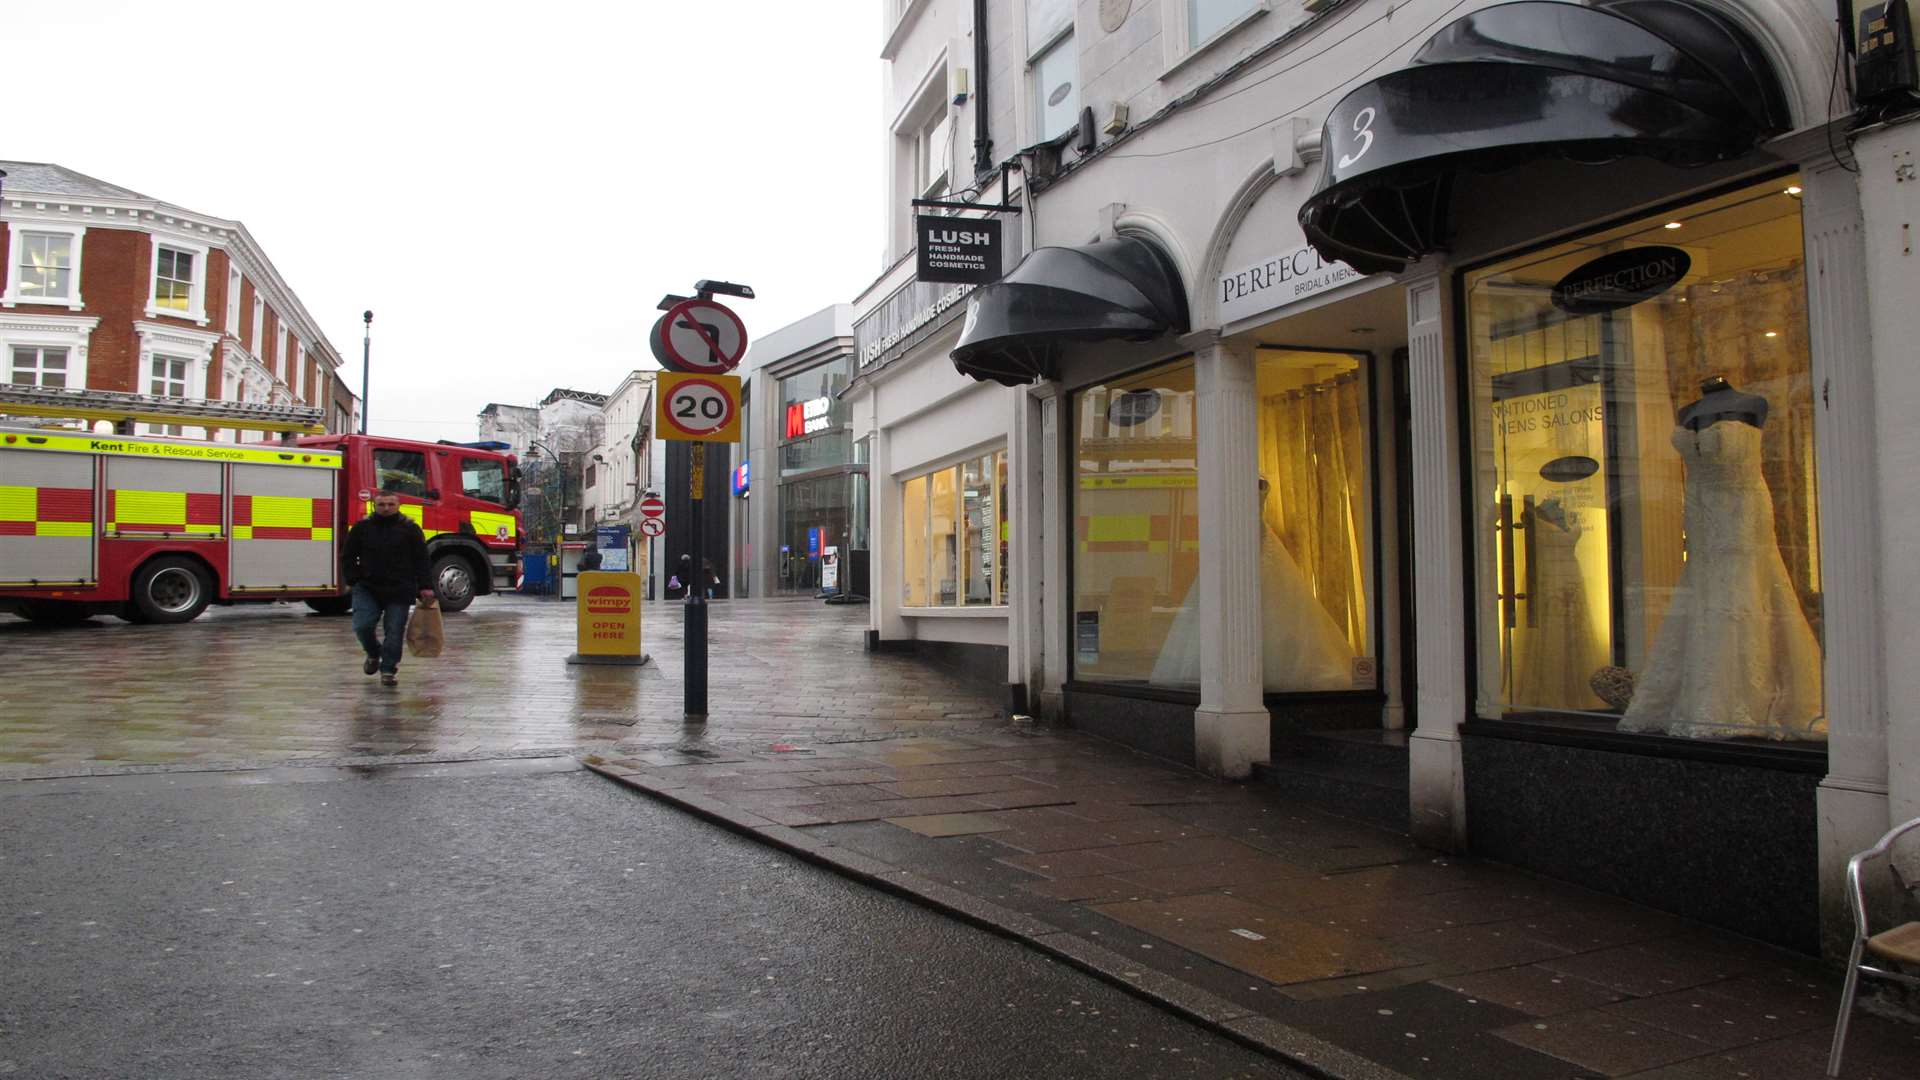 Firefighters checked in Lush and Perfection Bridal and Menswear before deciding it was a false alarm